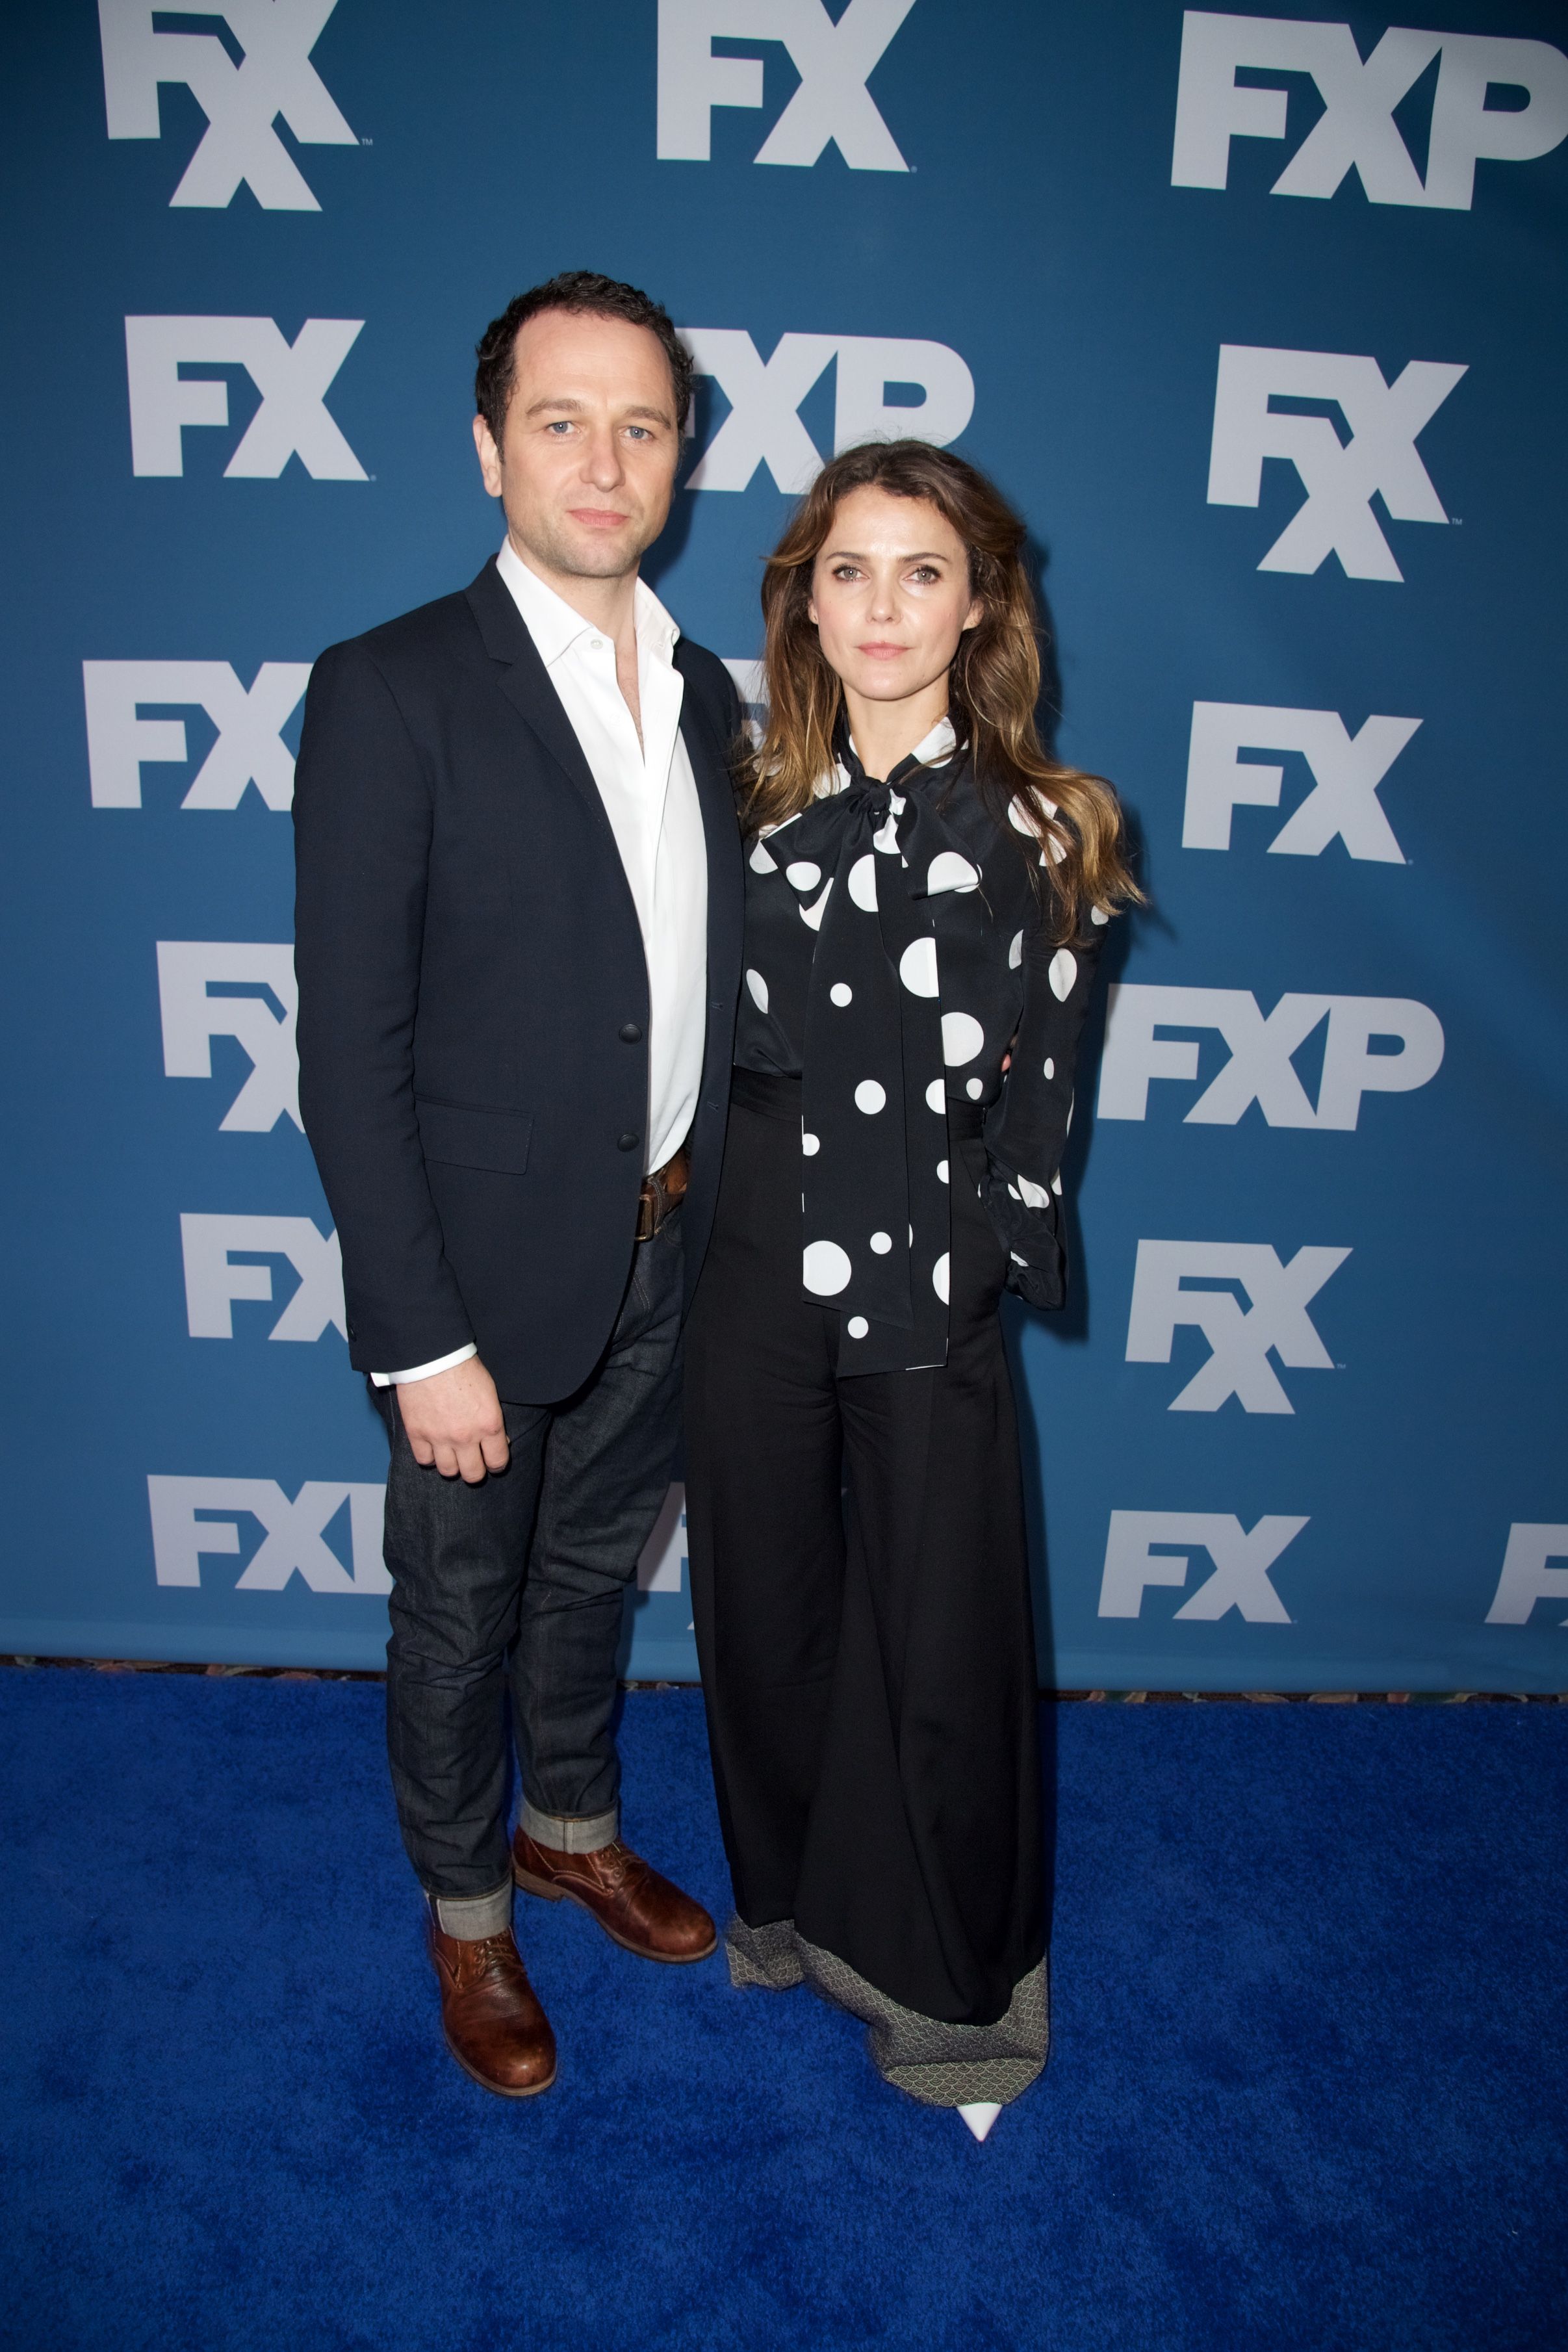 Matthew Rhys and Keri Russell at the 2018 Winter TCA Tour in 2018 in Pasadena, California | Source: Getty Images